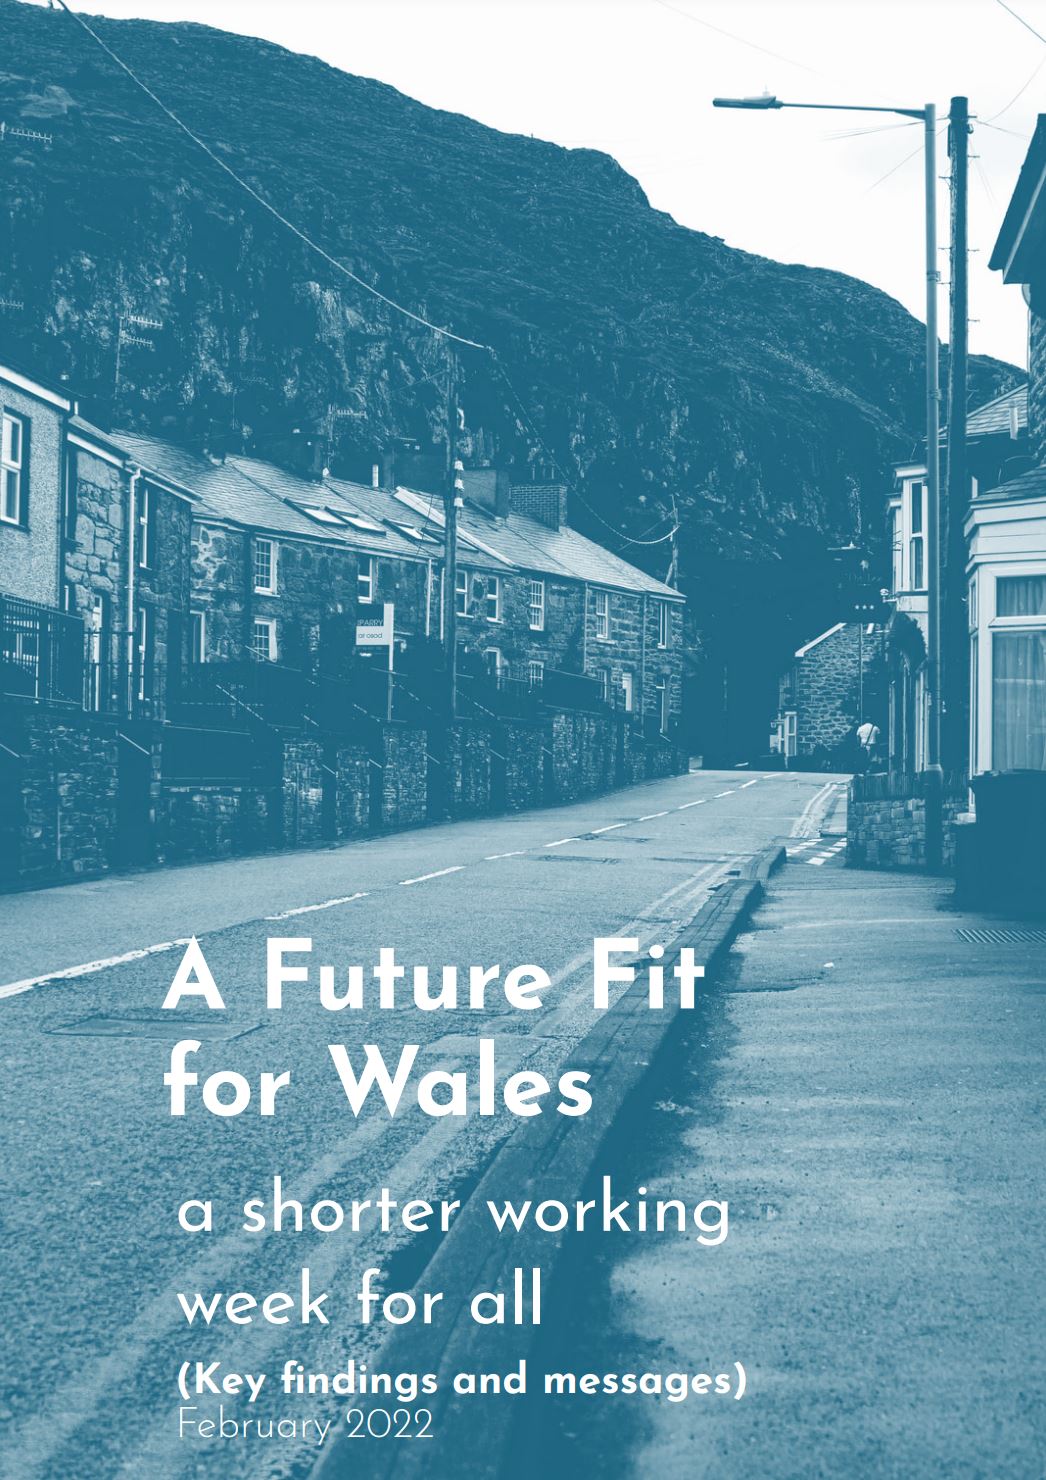  A Future Fit For Wales: The roadmap to a shorter working week. 